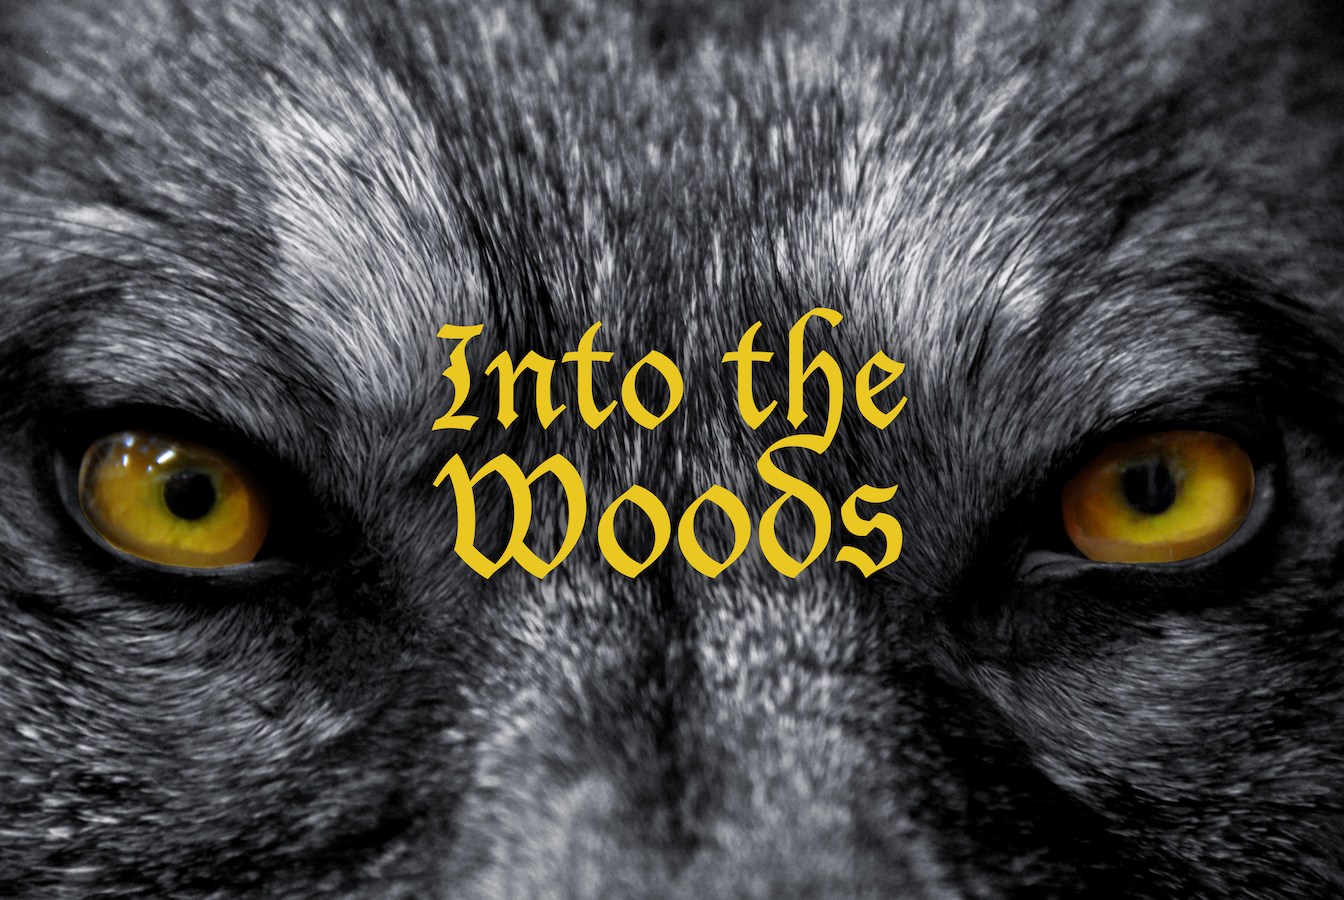 Featured image for post: Theatre at Barton Opens the 2018-19 Season with Sondheim’s “Into the Woods” November 8-11